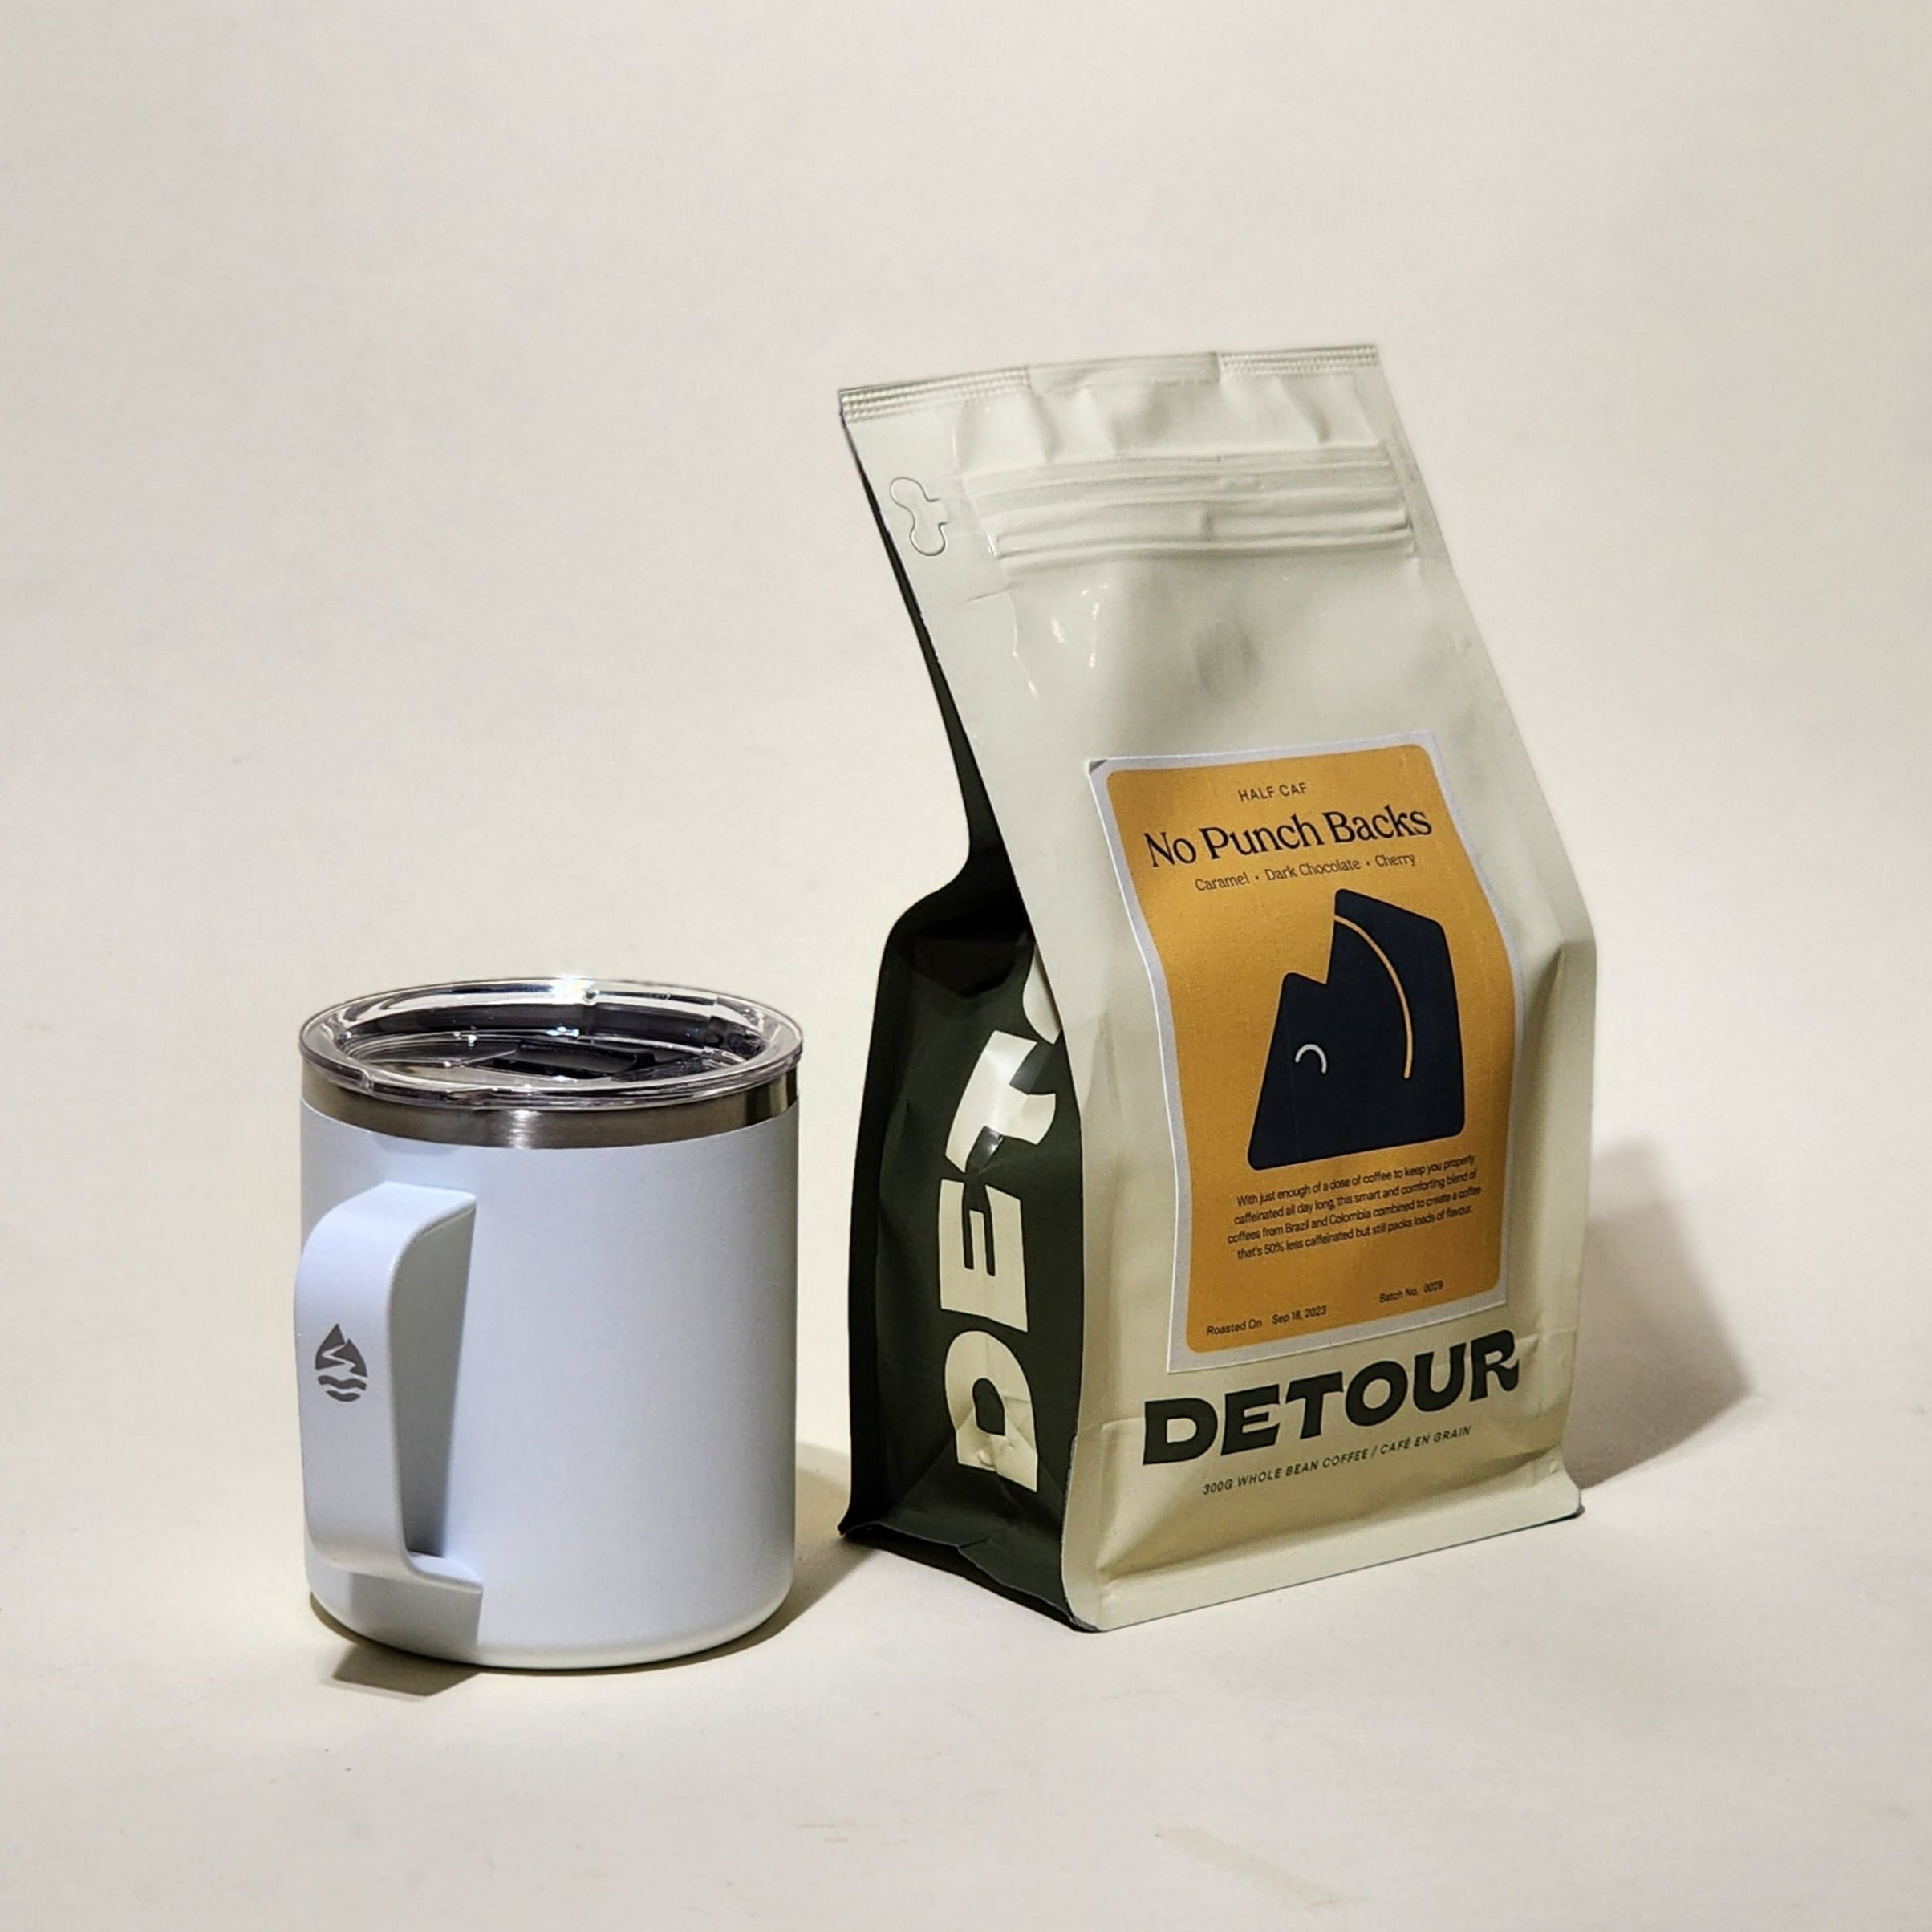 Detour Coffee Roaster No Punch Backs Half Caf - Caramel, Dark Chocolate, Cherry Tasting Profile - Filter Balanced Coffee Style - Brazil + Colombia Origin - Learn More on Our Website